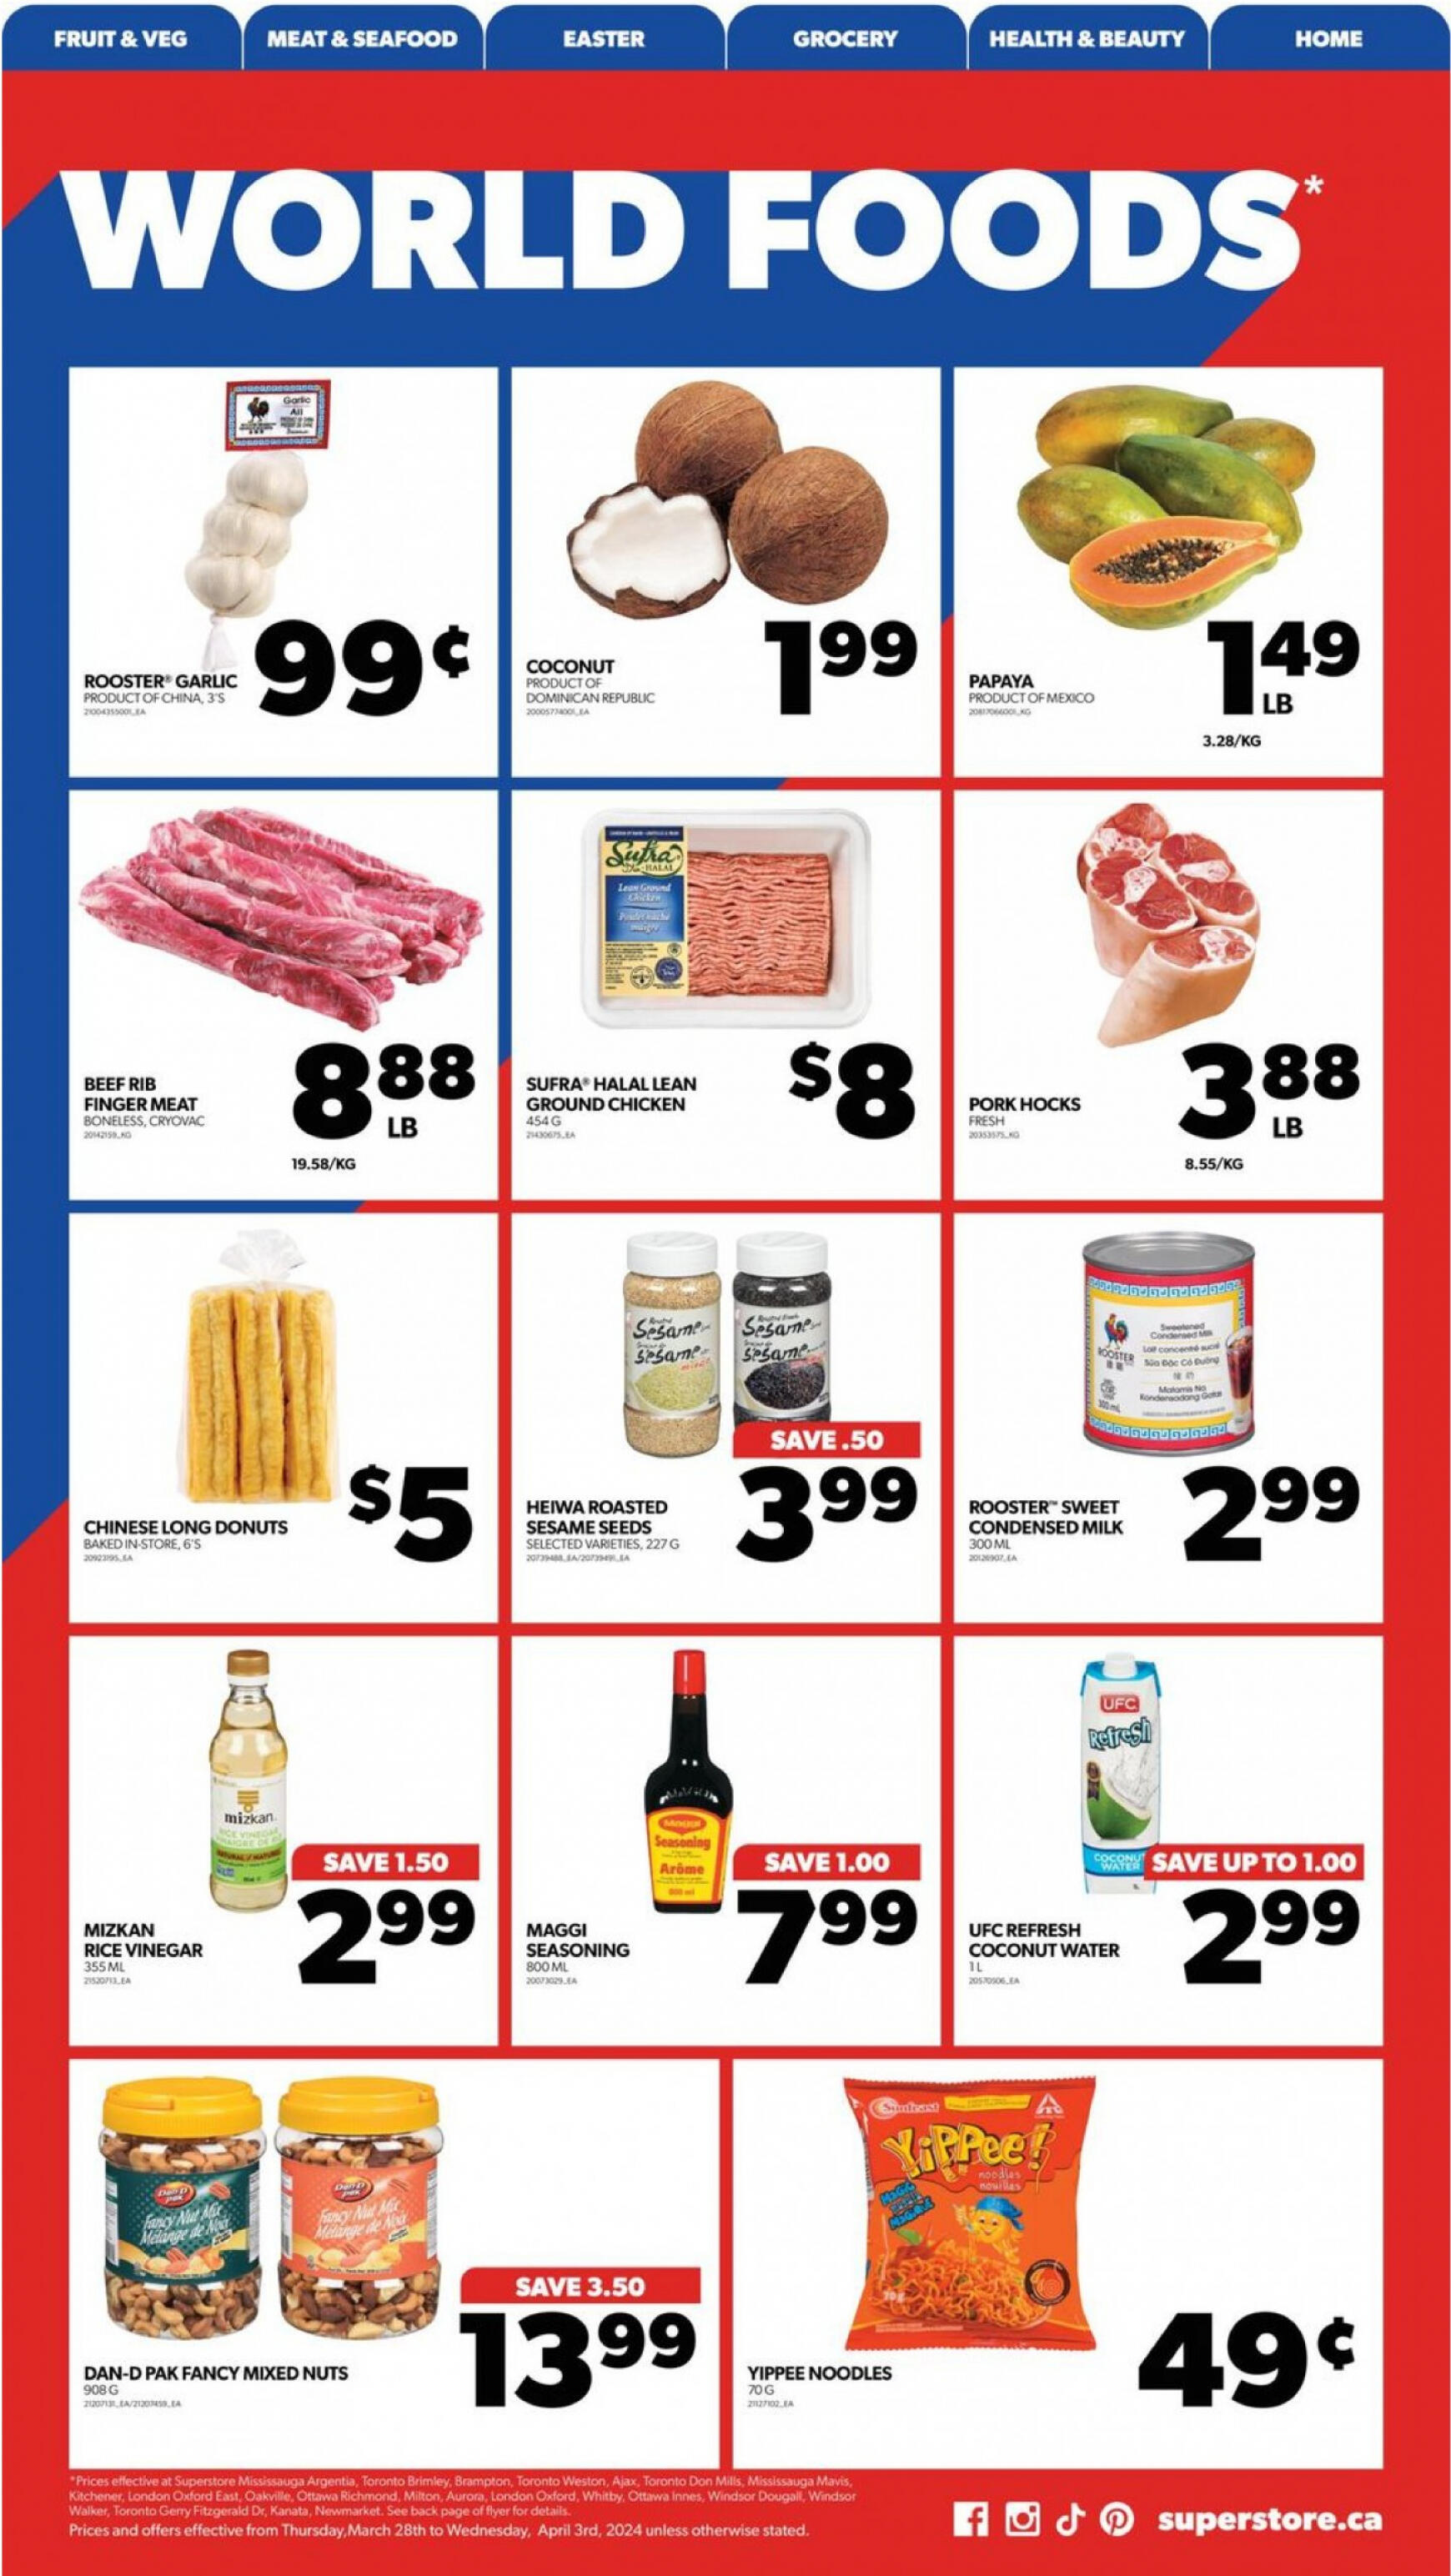 real-canadian-superstore - Real Canadian Superstore flyer current 28.03. - 03.04. - page: 35